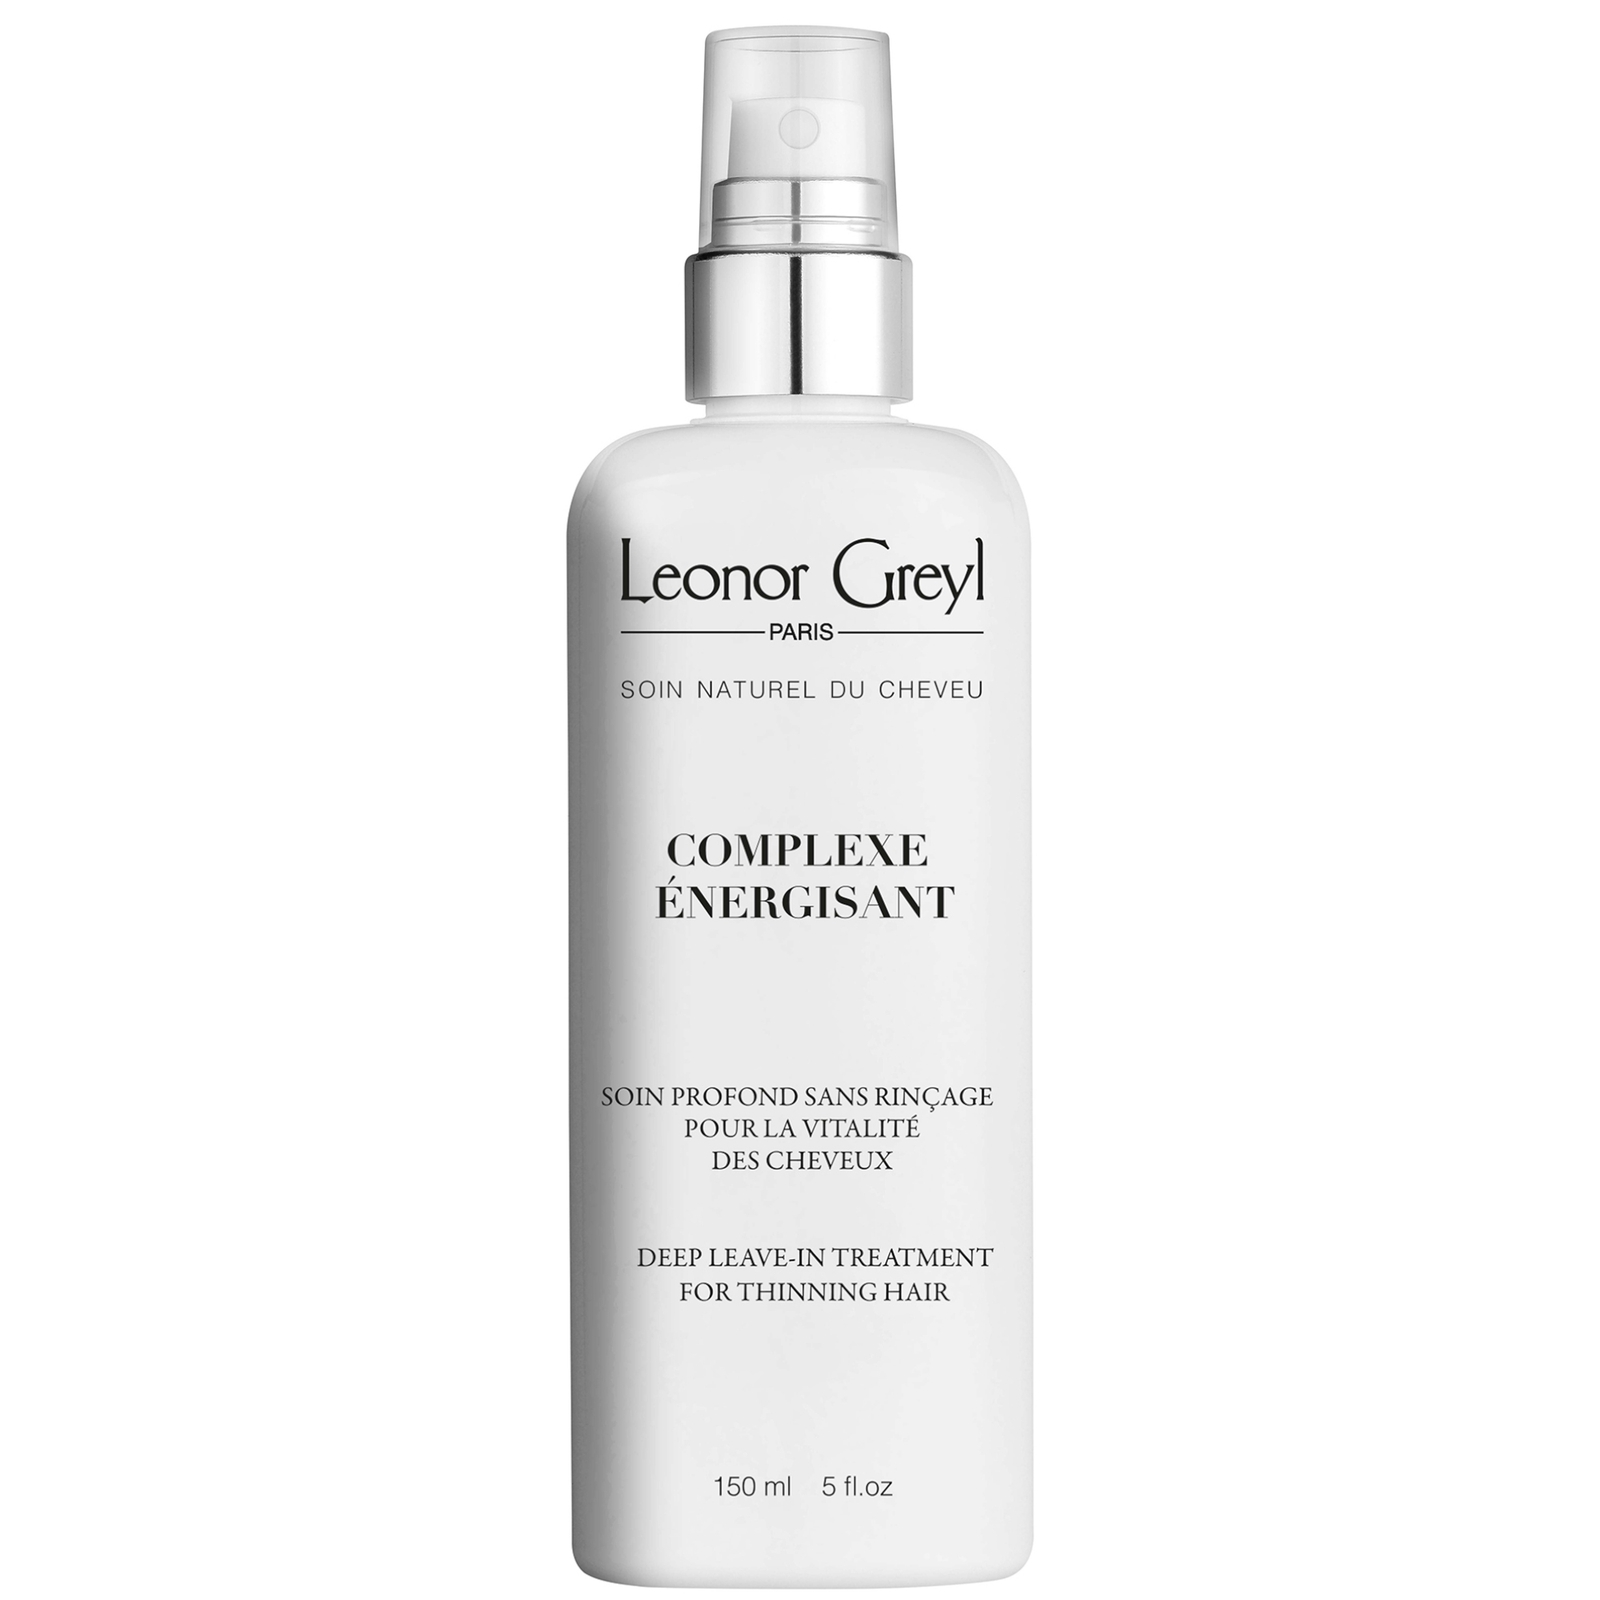 Leonor Greyl Complexe Énergisant Leave-in Scalp Treatment For Thinning Hair 150ml